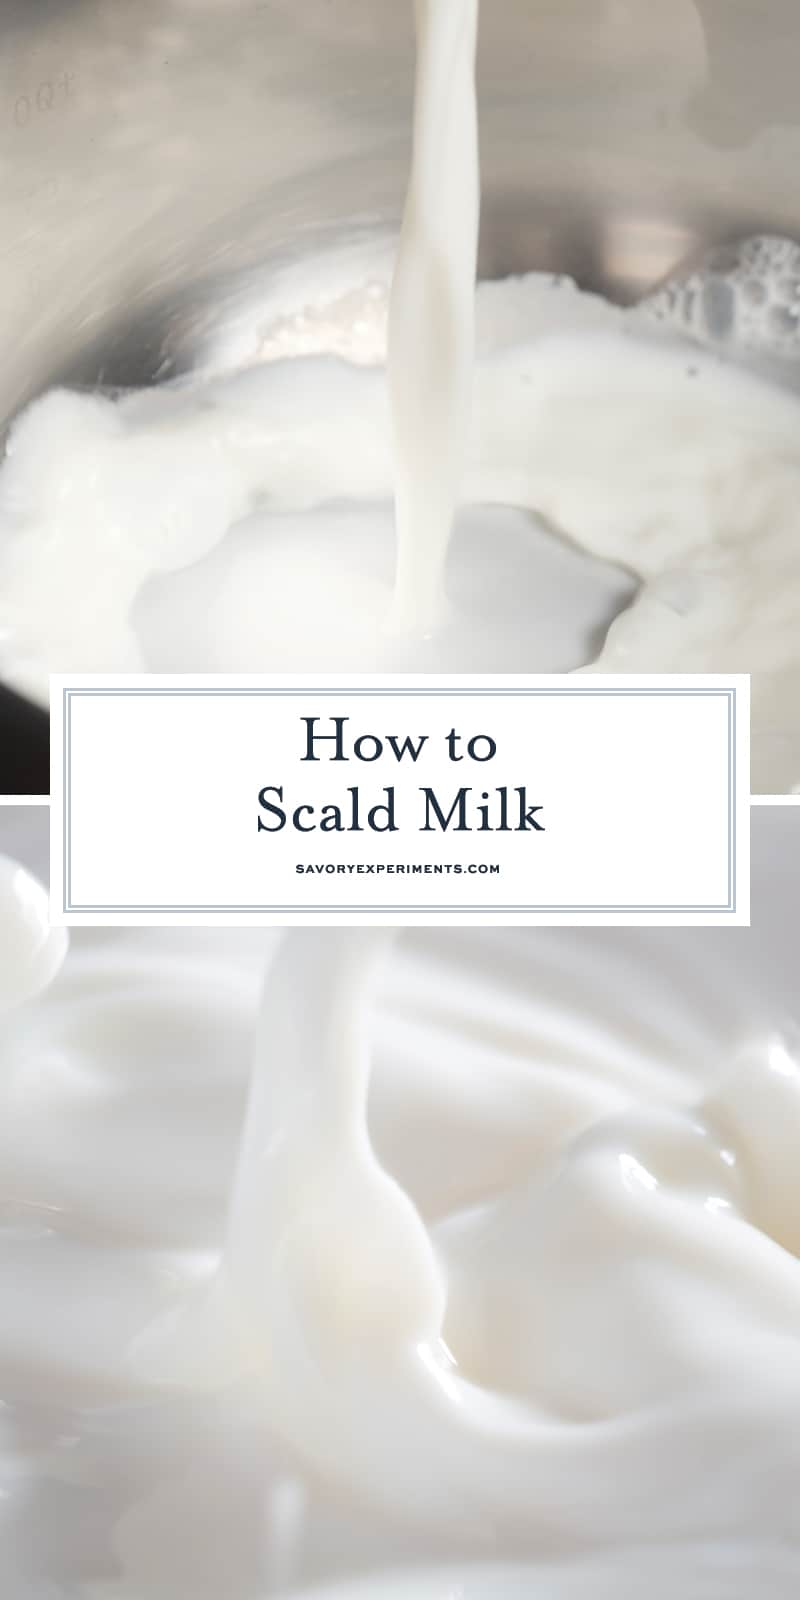 How to Scald Milk  Easy Baking Tips and Recipes: Cookies, Breads